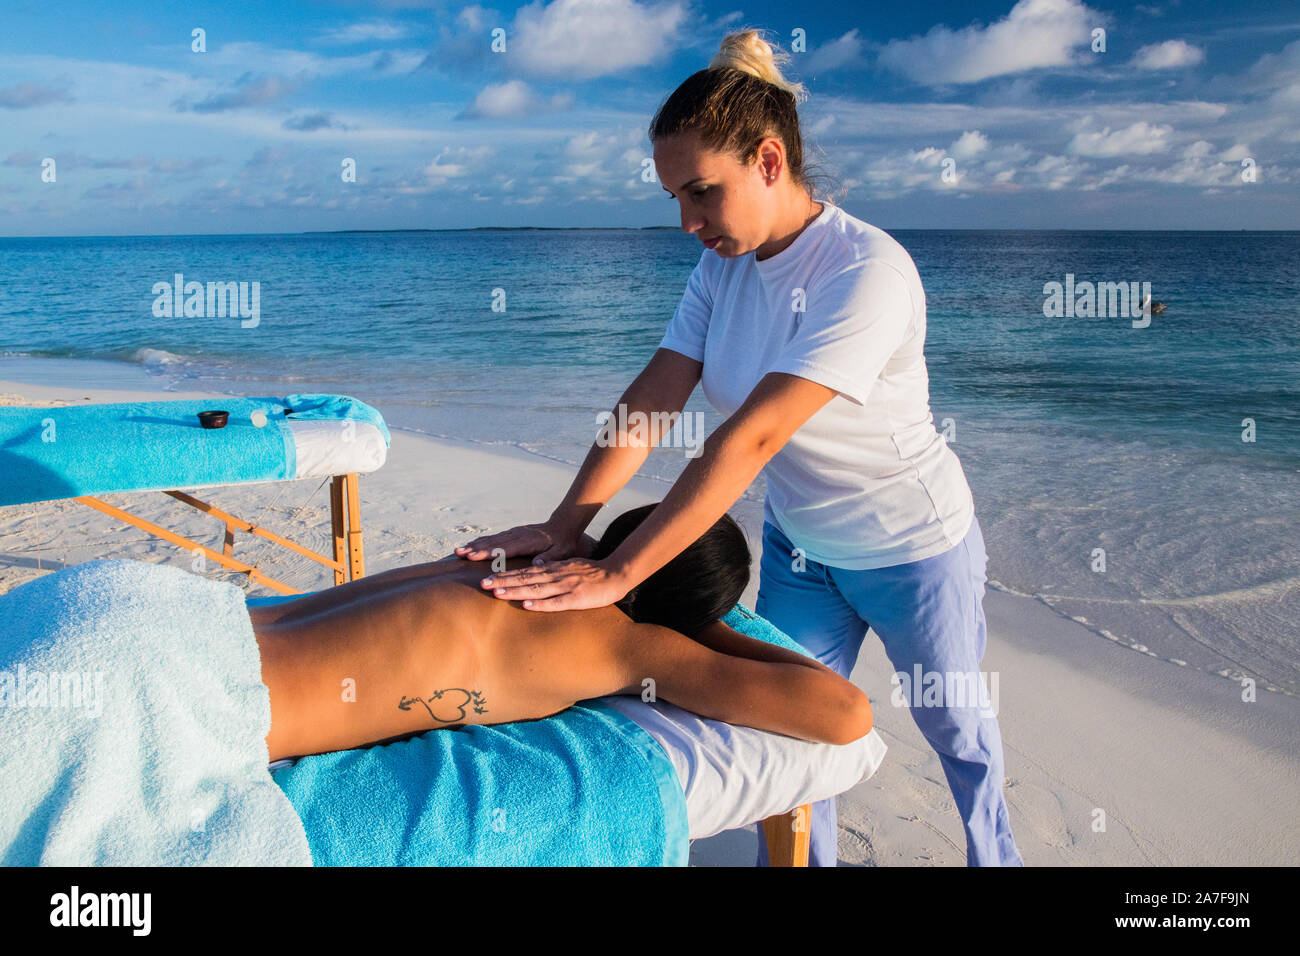 Caribbean Spa Massage High Resolution Stock Photography and Images - Alamy